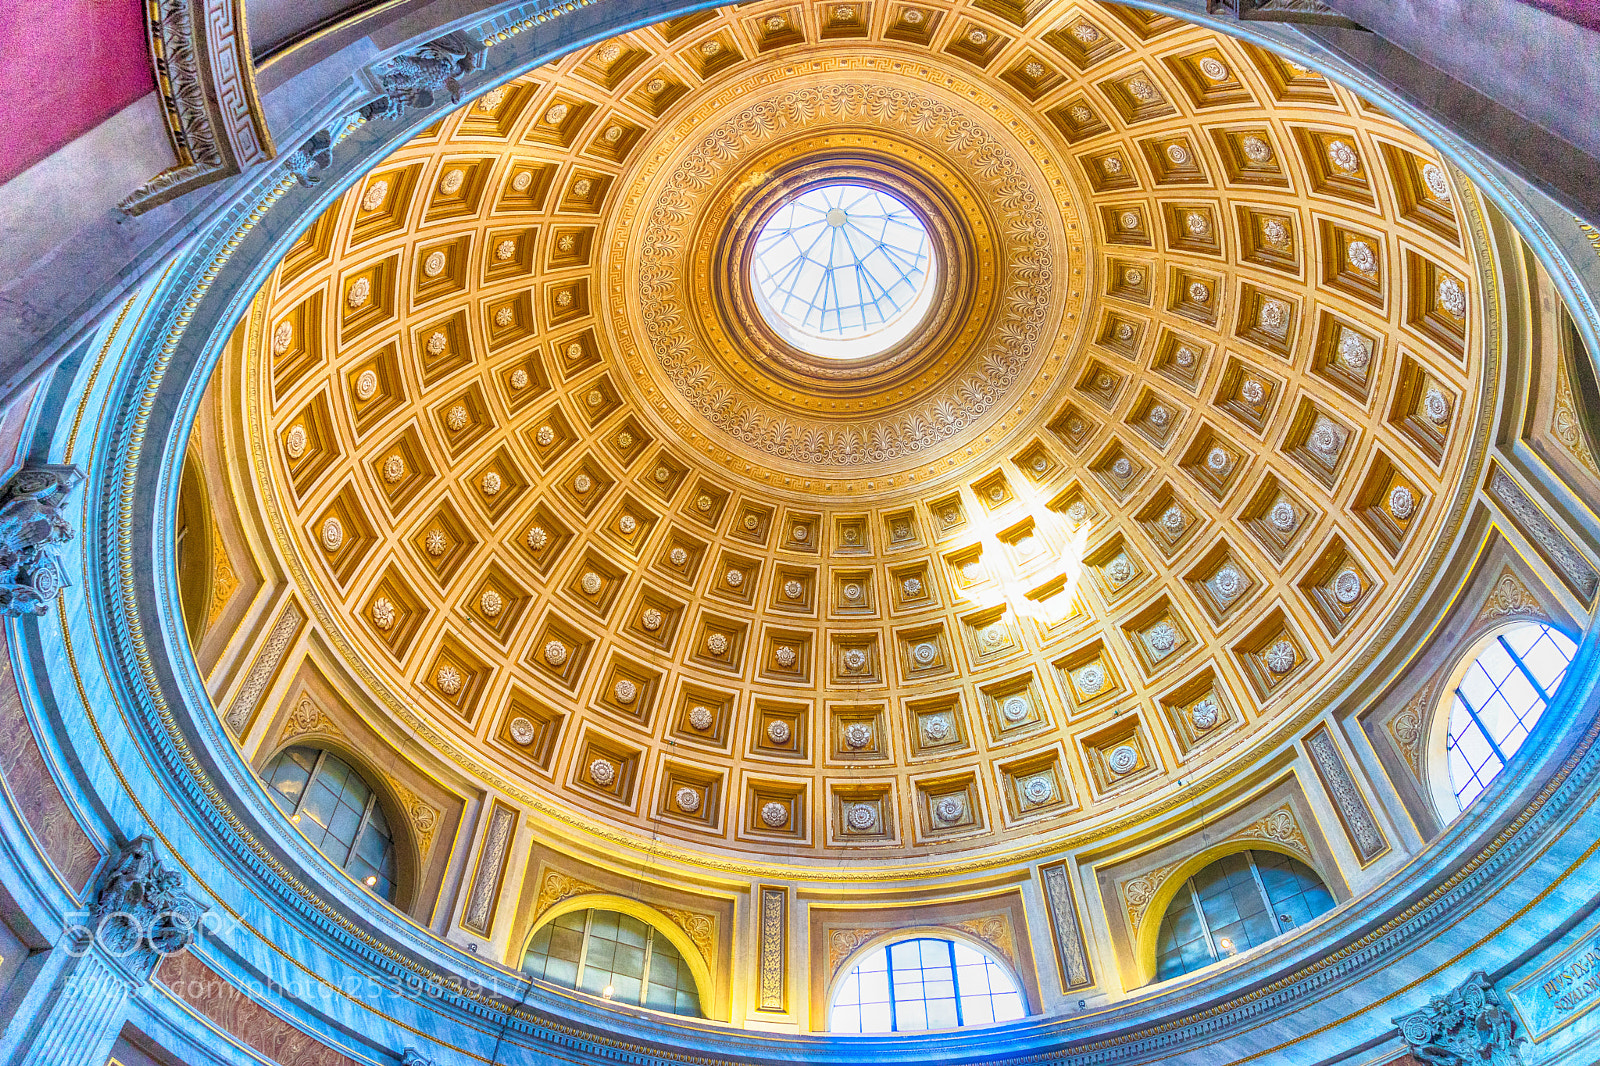 Sony a7 sample photo. Dome inside the vatican photography